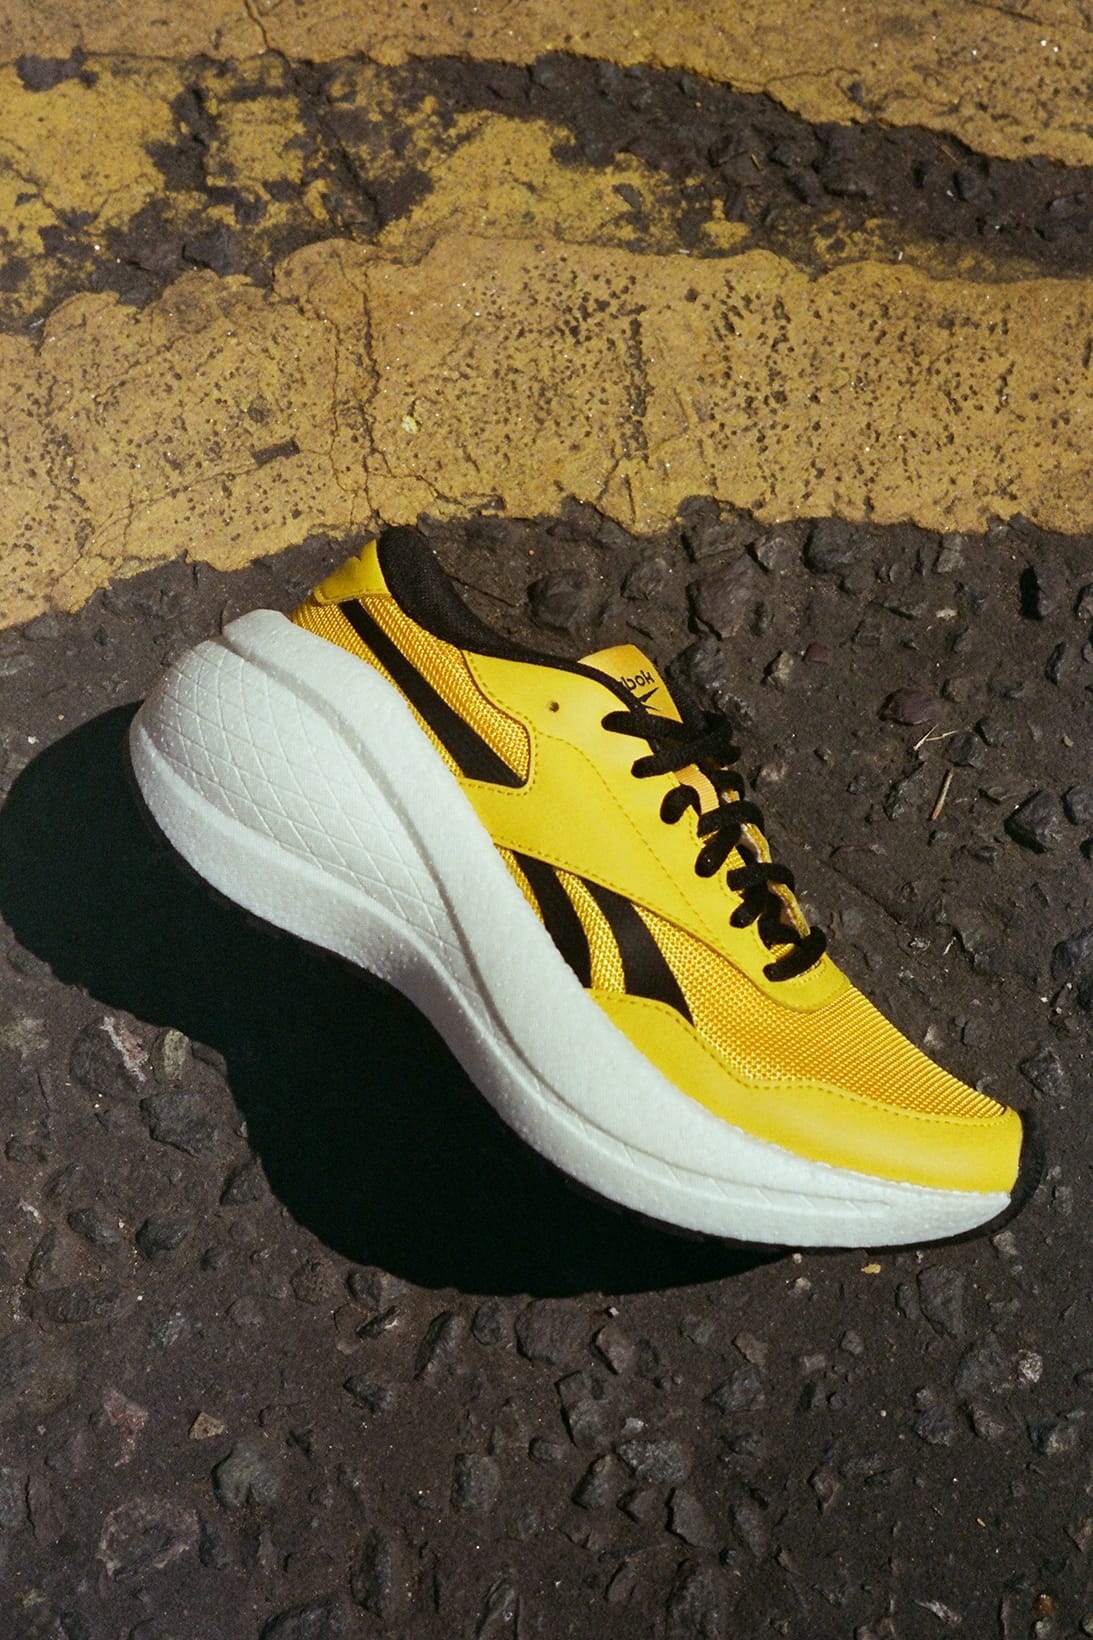 reebok black and yellow shoes